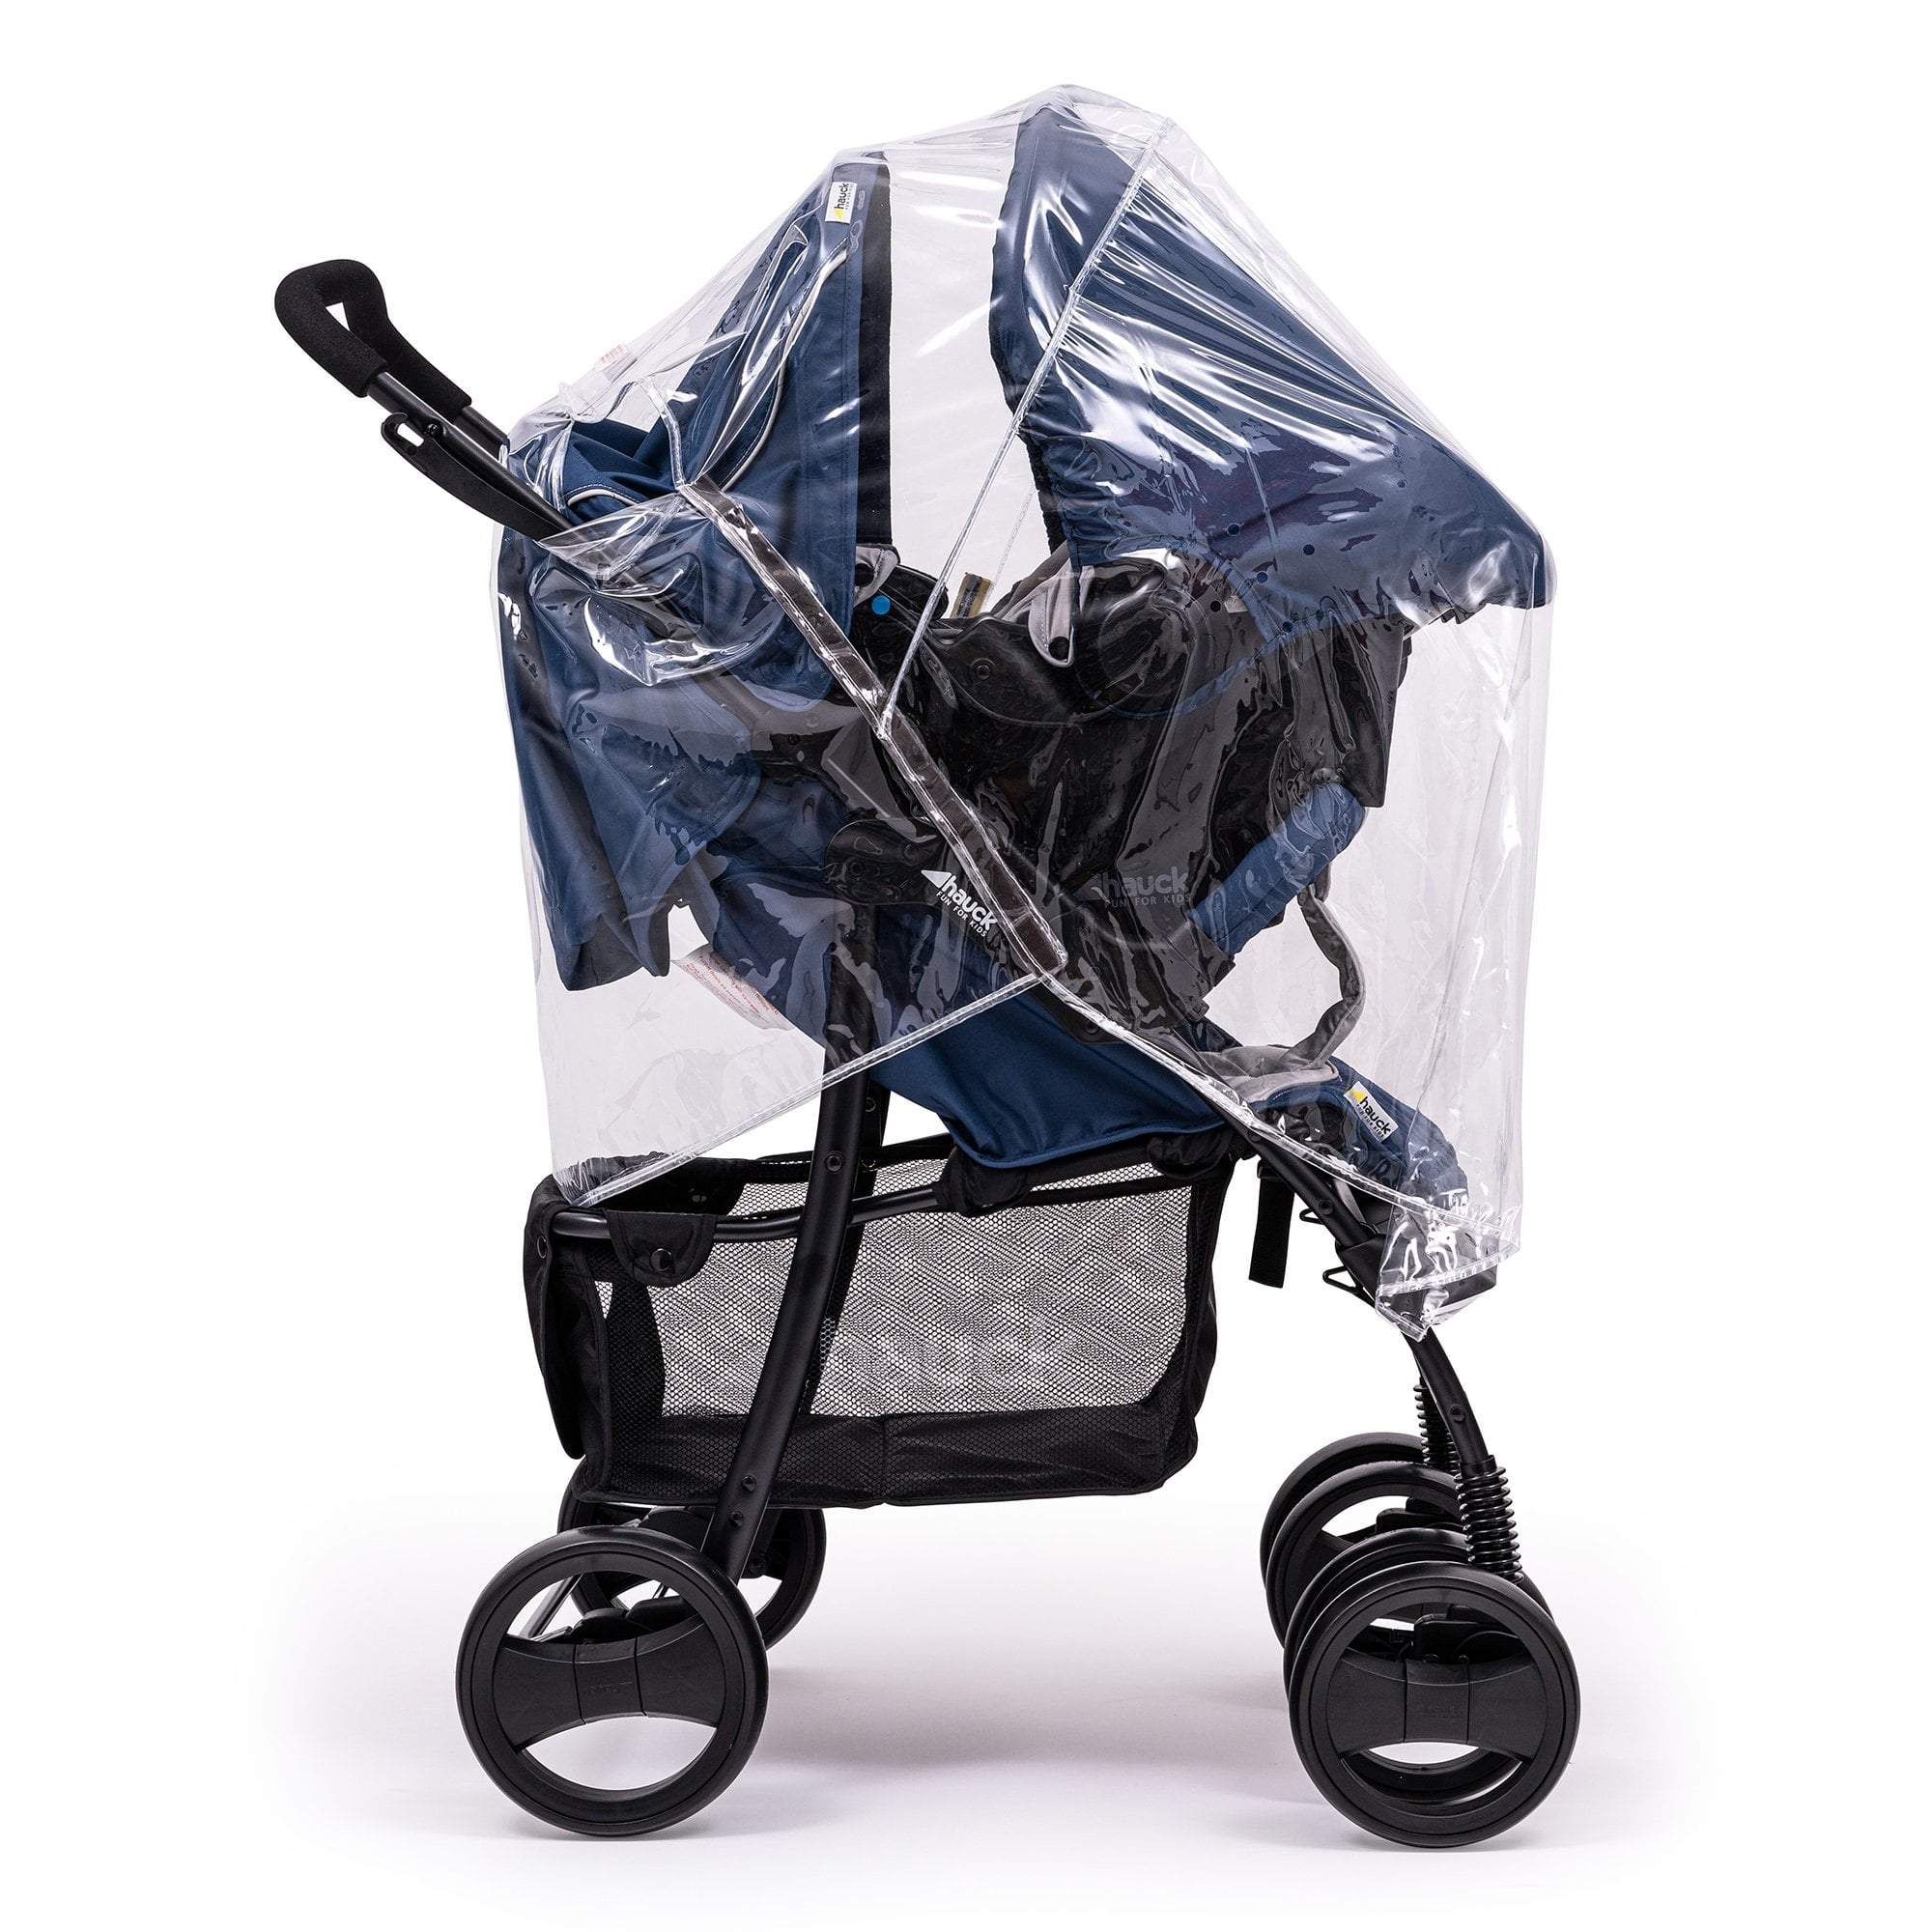 Travel System Raincover Compatible with Stokke - Fits All Models - For Your Little One